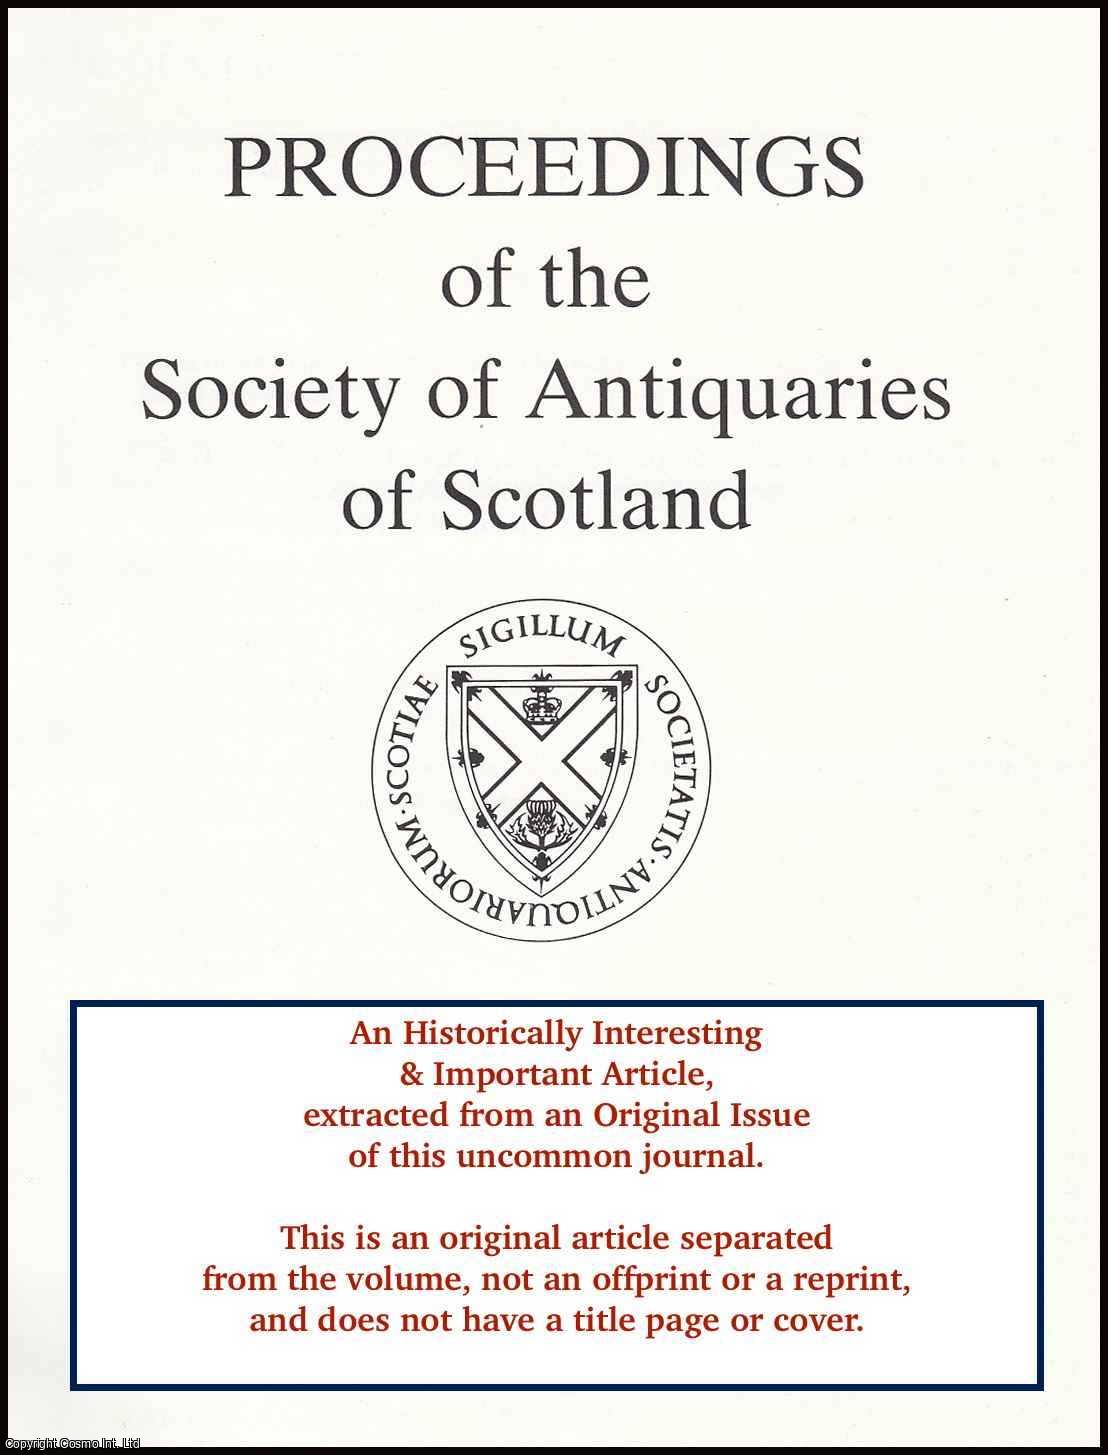 T.N. Todd - The Aerodynamics of Carved Stone Balls. An original article from the Proceedings of the Society of Antiquaries of Scotland, 2006.